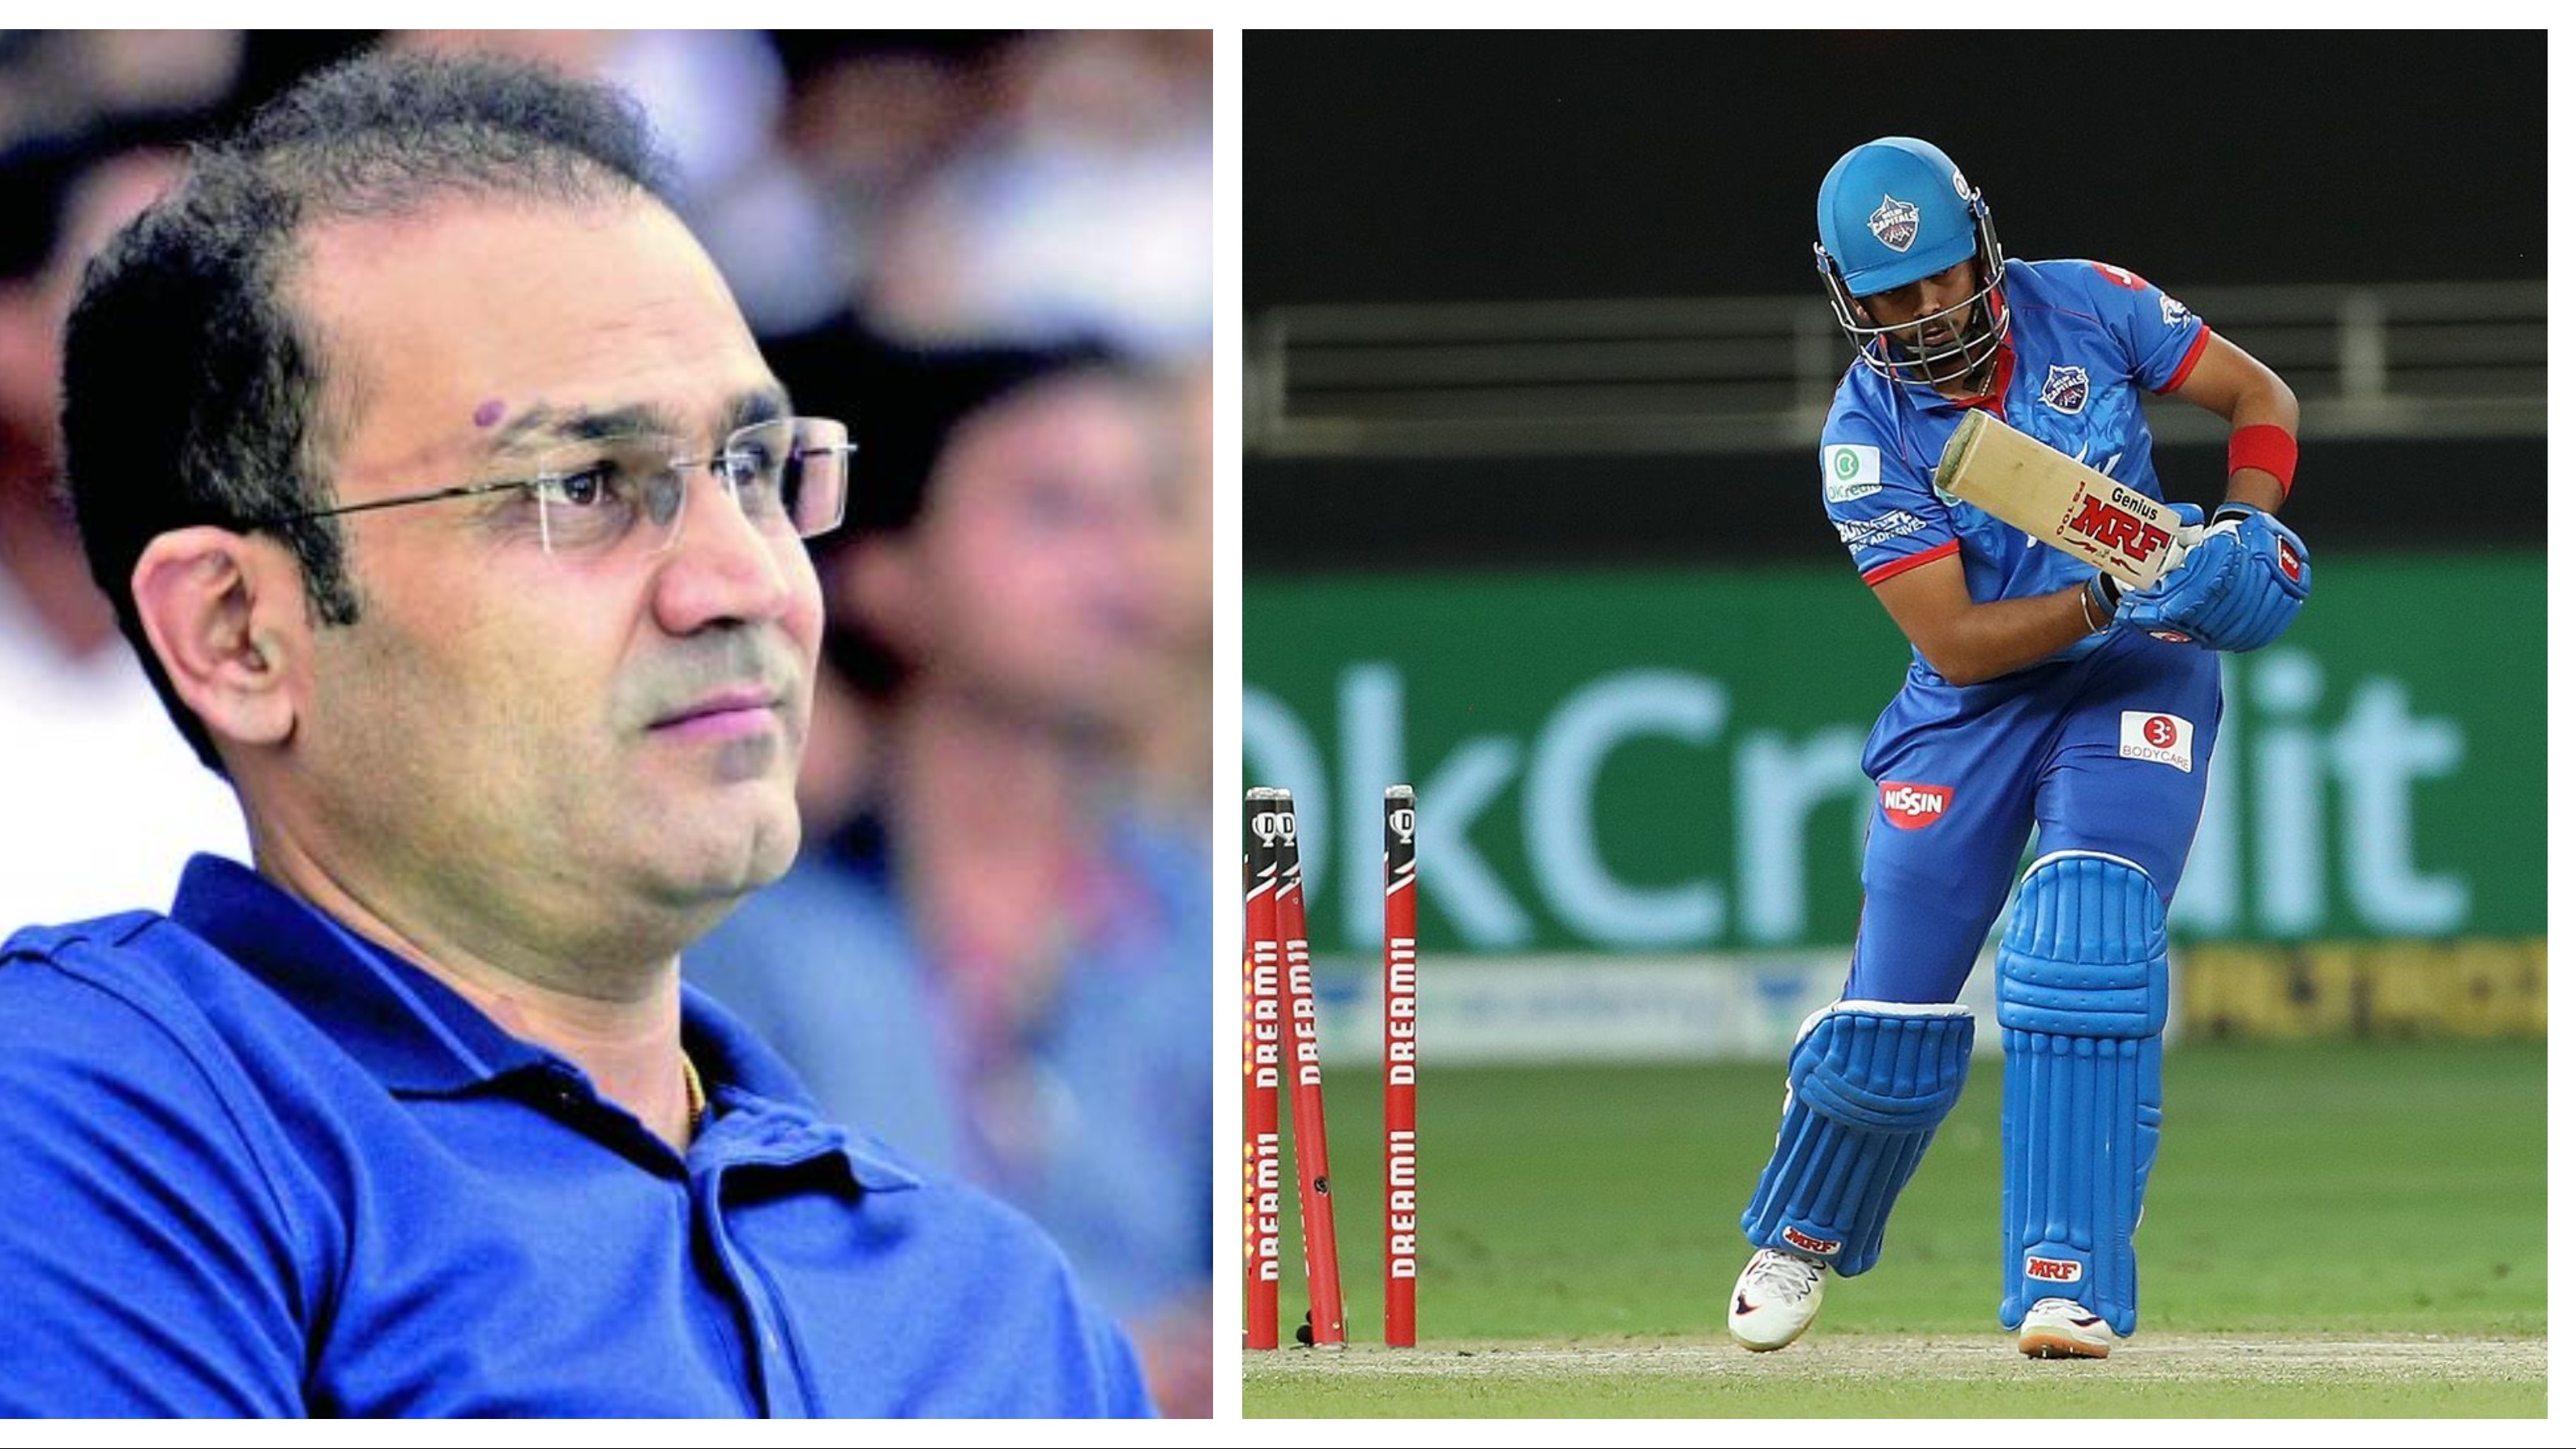 IPL 2020: Sehwag recalls personal anecdote to back Shaw's exclusion from DC's XI 